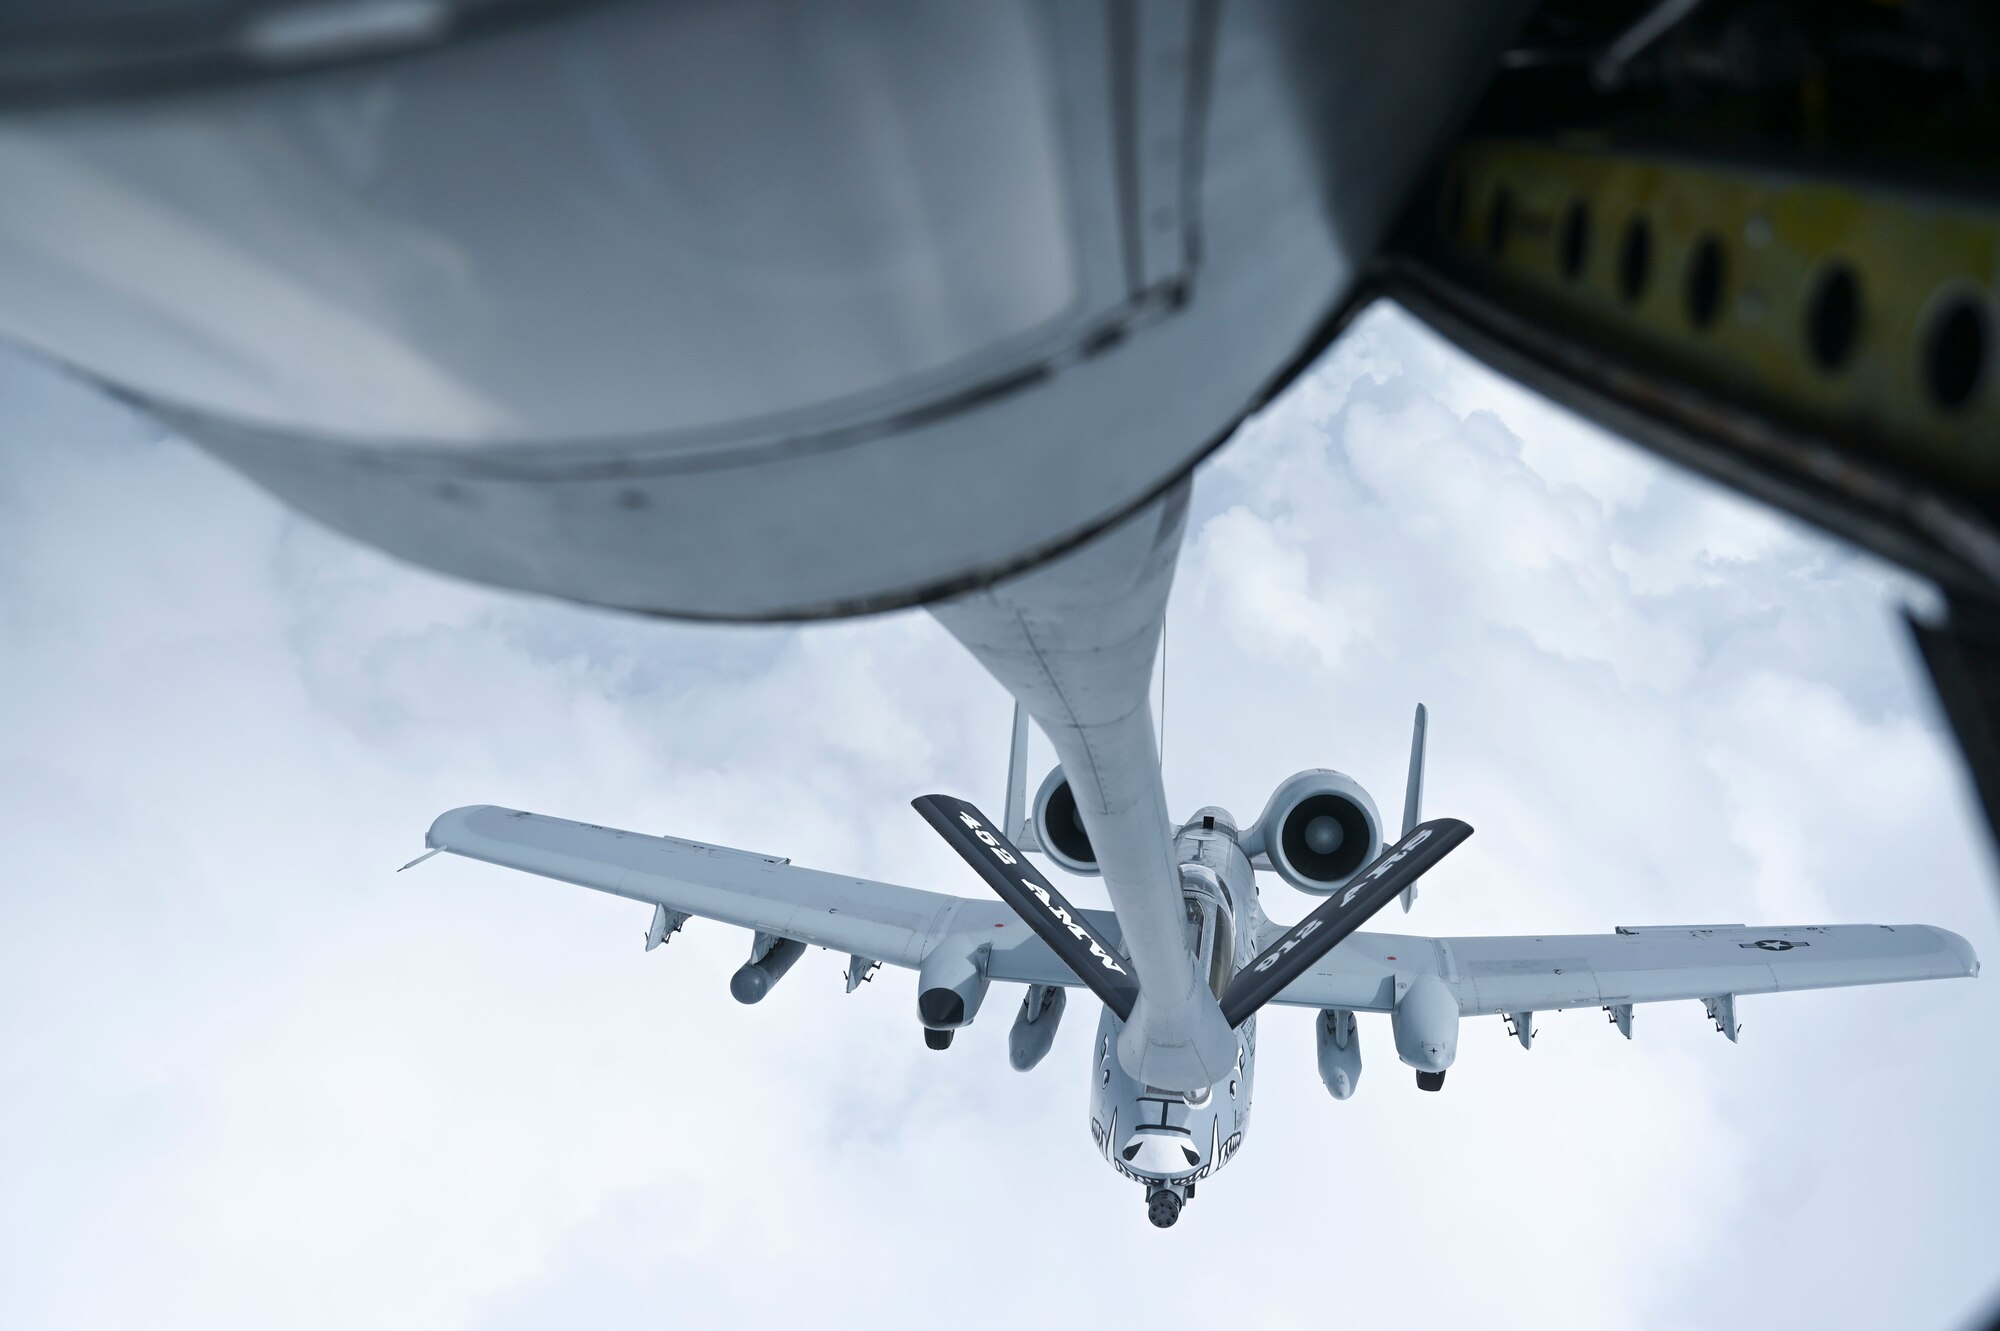 An AATC A-10 from Davis-Monthan Air Force Base, Arizona, receives fuel from a California Air Reserve KC-135 en route to Wake Island Airfield from Honolulu International Airport, Hawaii, as part of Exercise KANI WILDCAT.